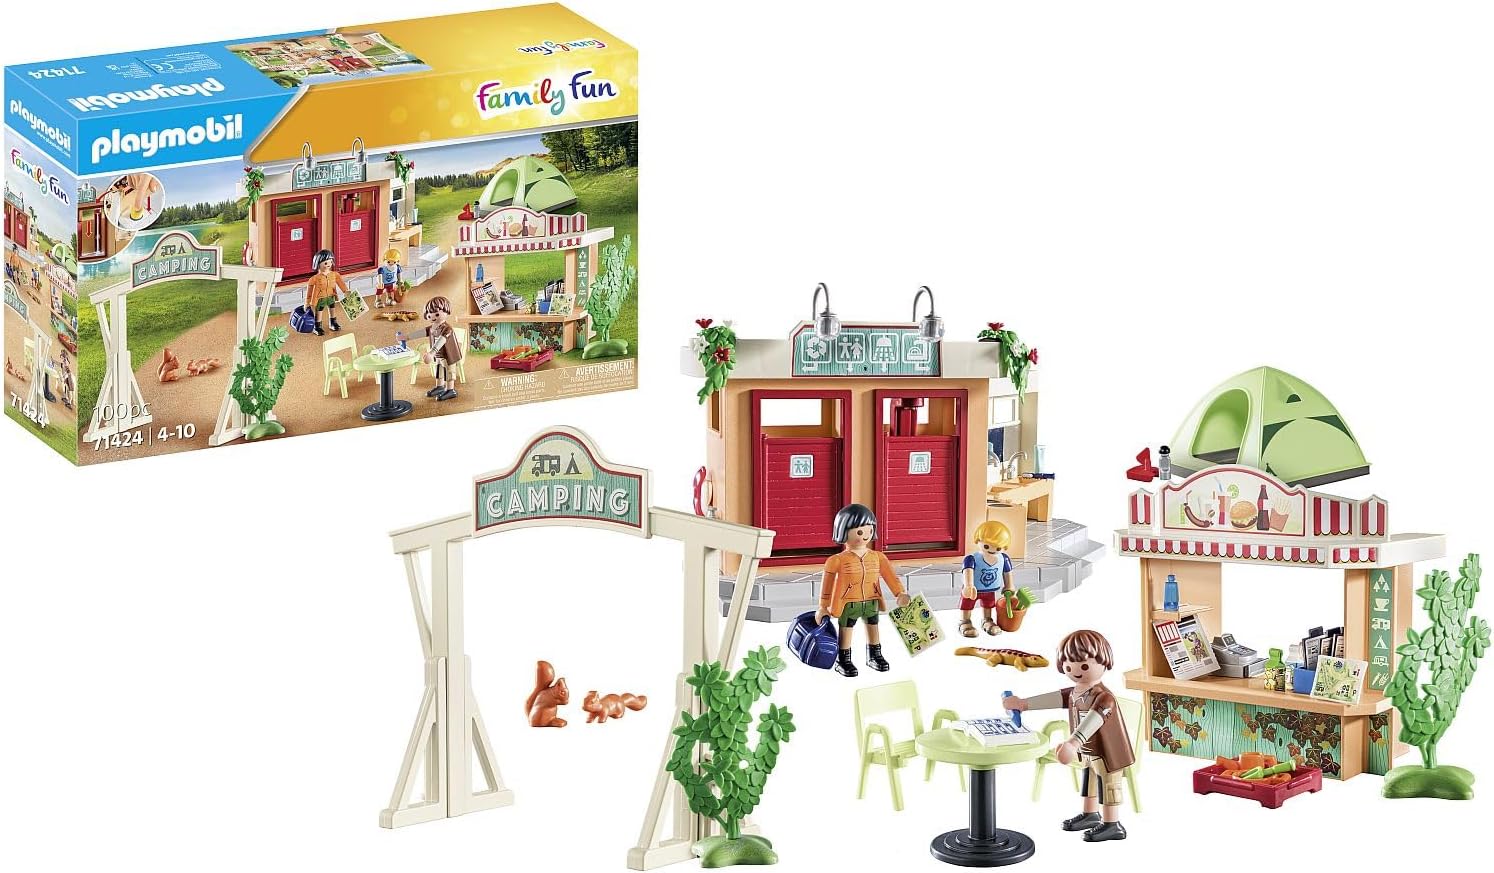 Playmobil Family Fun 71424 Campsite, Camping, Holiday in Nature with Tent, Kitchen and Sanitary Building, Exciting Camping Adventure With The Family, Toy for Children from 4 Years